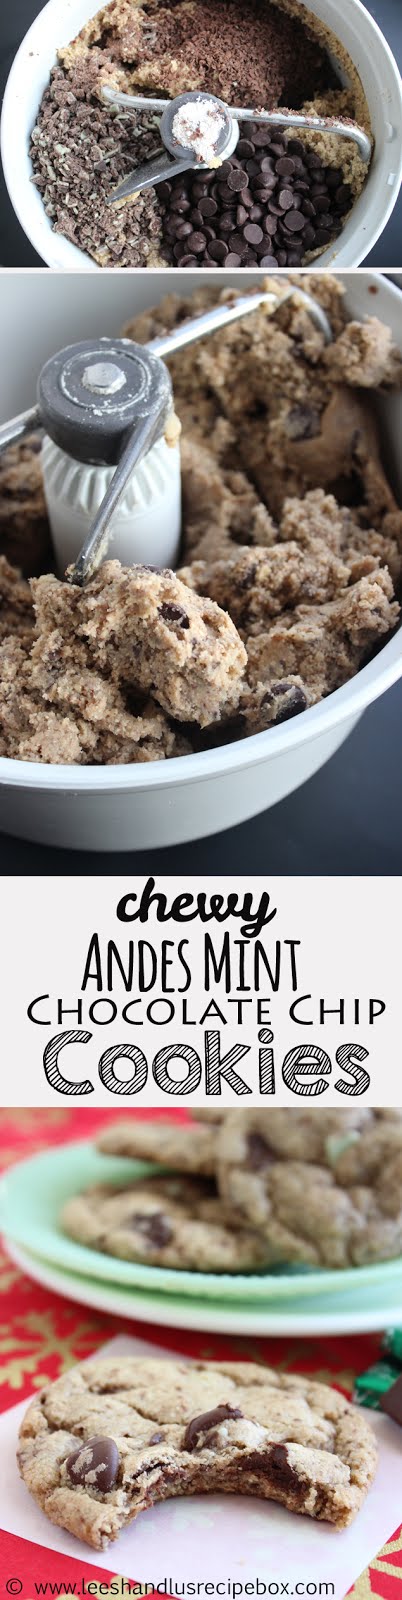 Chewy Andes Mint Chocolate Chip Cookies. So good!! 